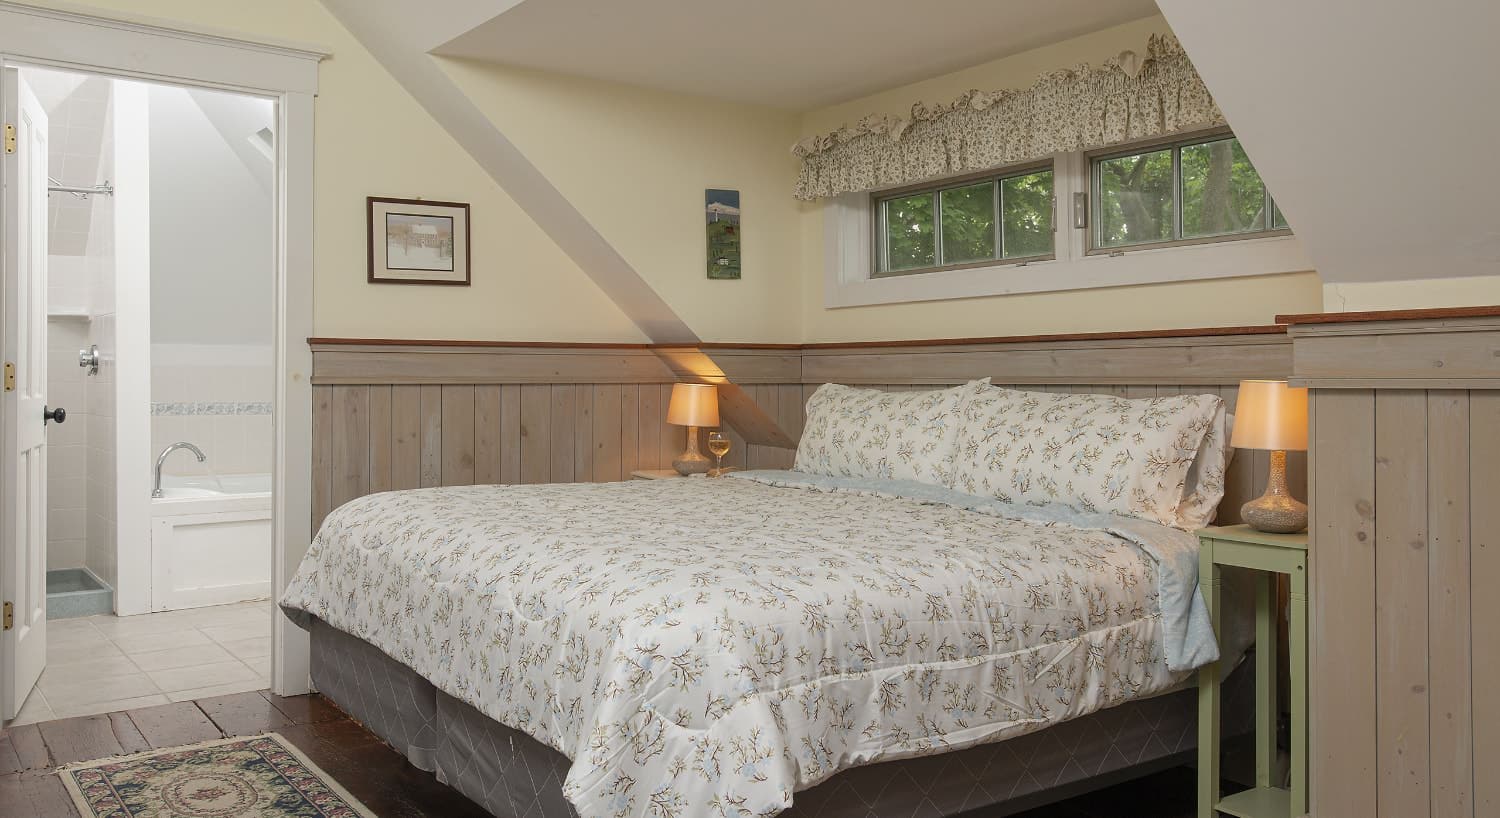 Bedroom with white walls, light wooden wainscoting, floral bedding, and view into bathroom